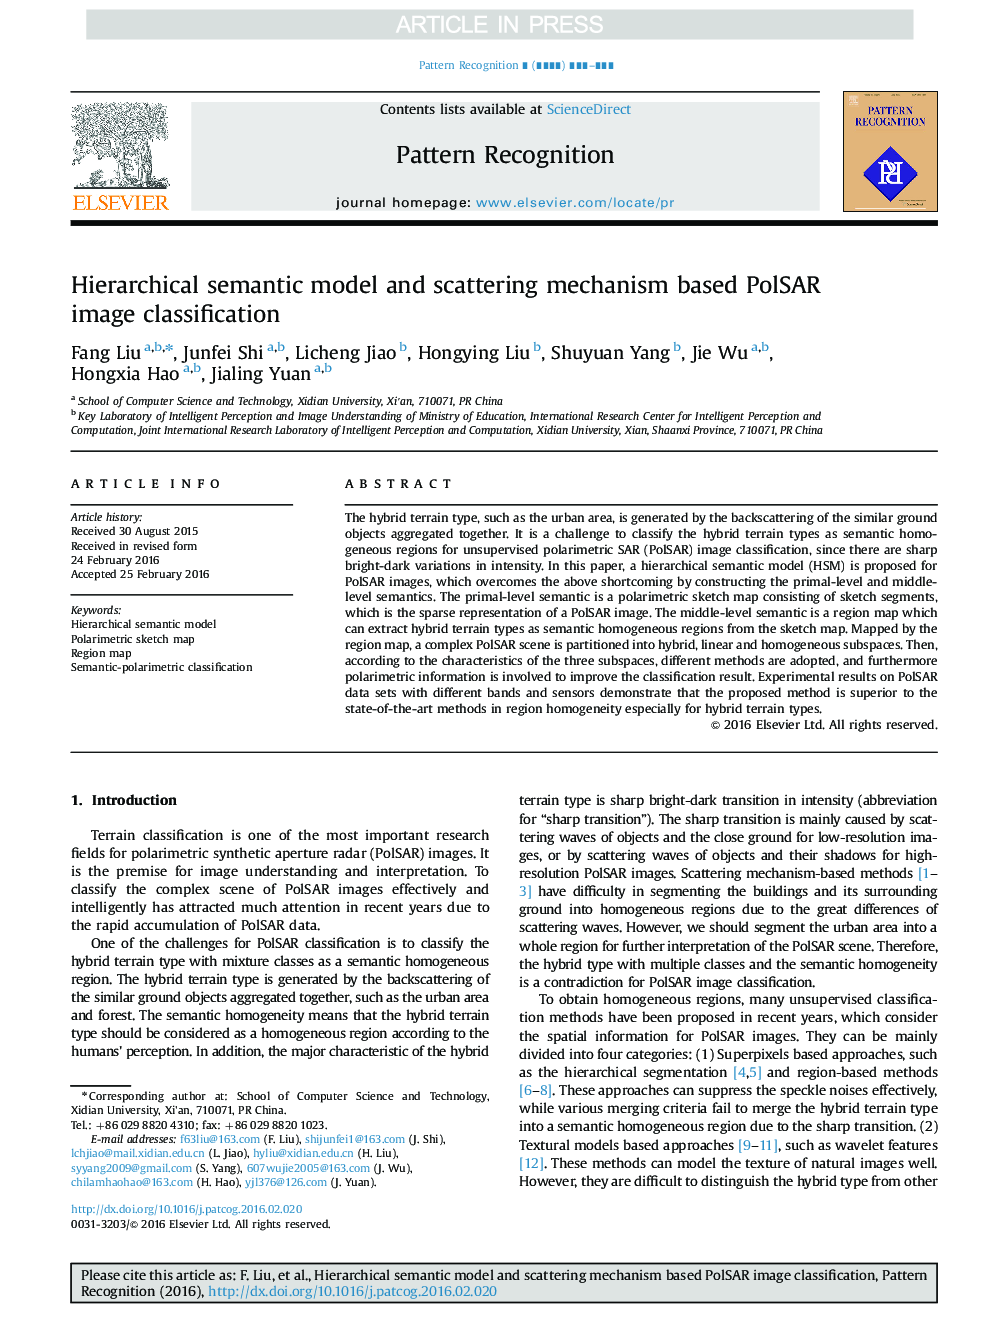 Hierarchical semantic model and scattering mechanism based PolSAR image classification